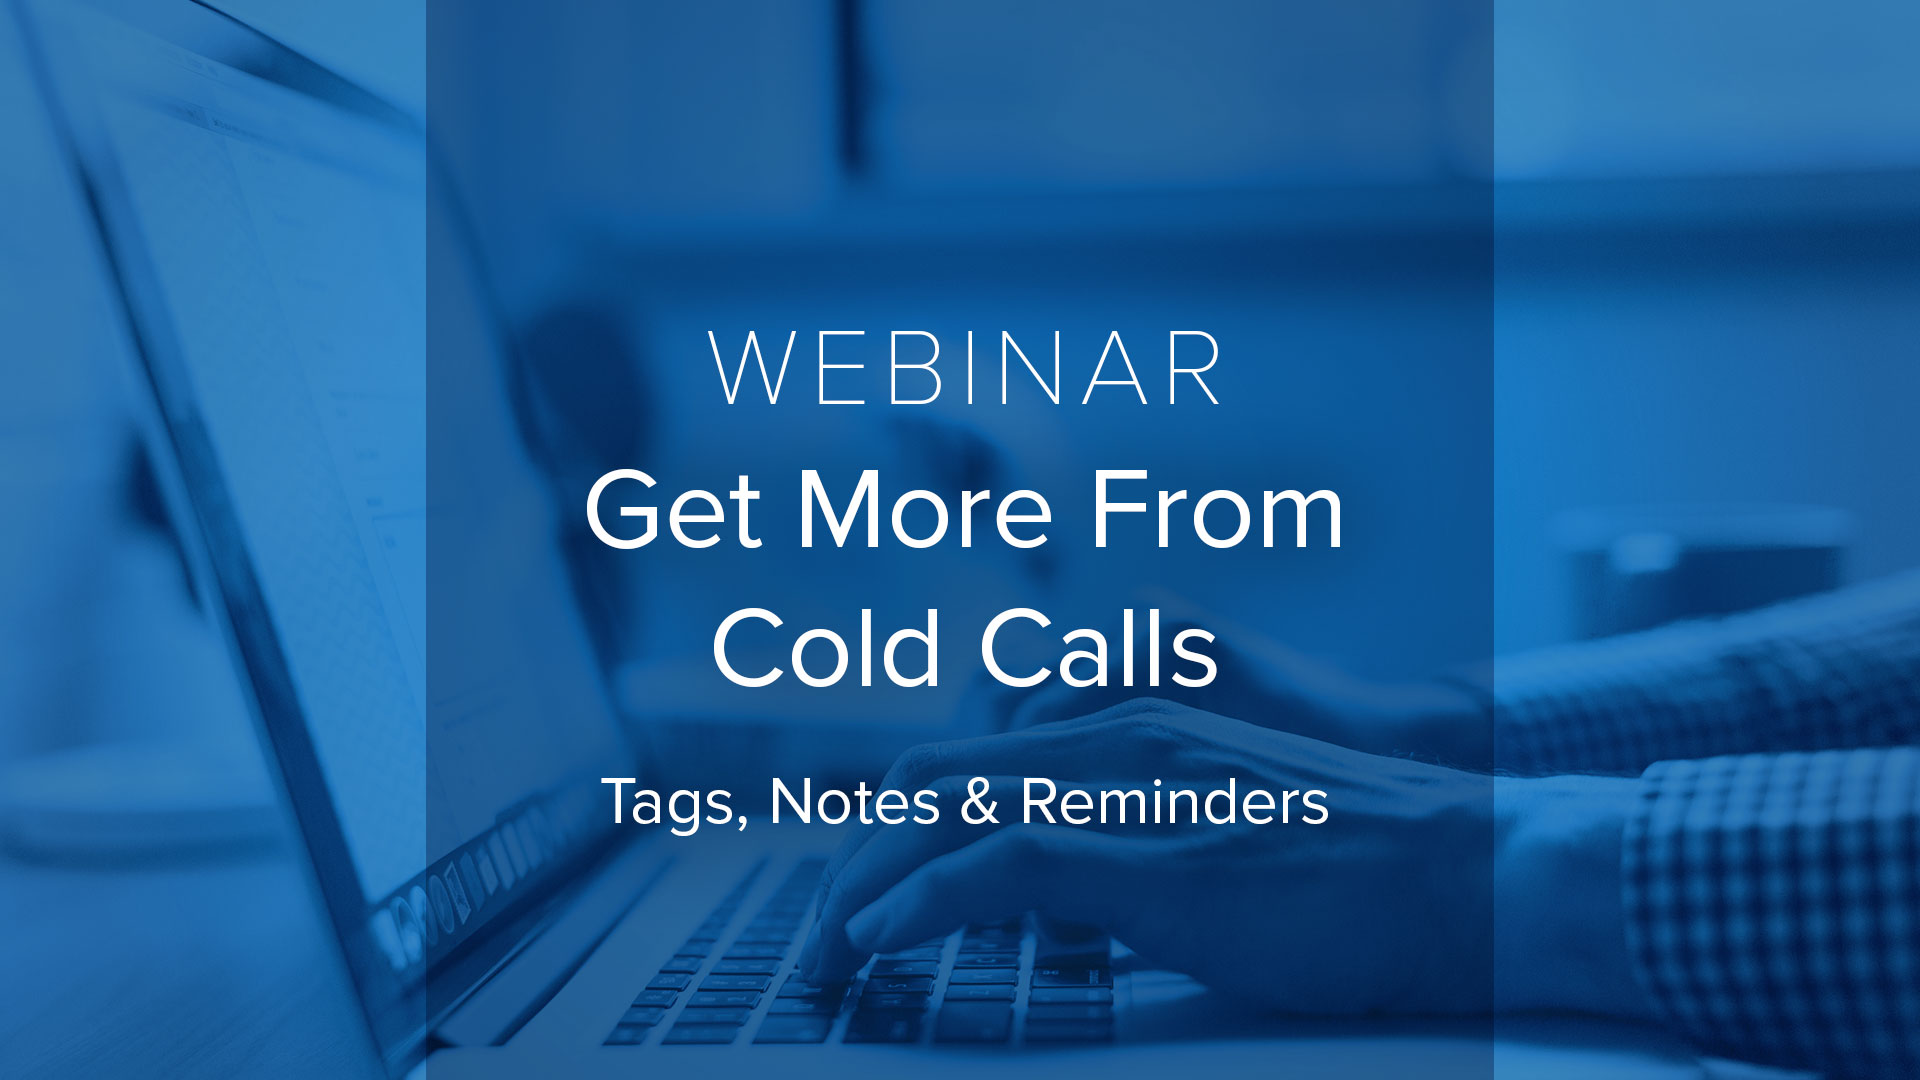 [Webinar] Get More from Cold Calls with Notes, Tags, and Reminders